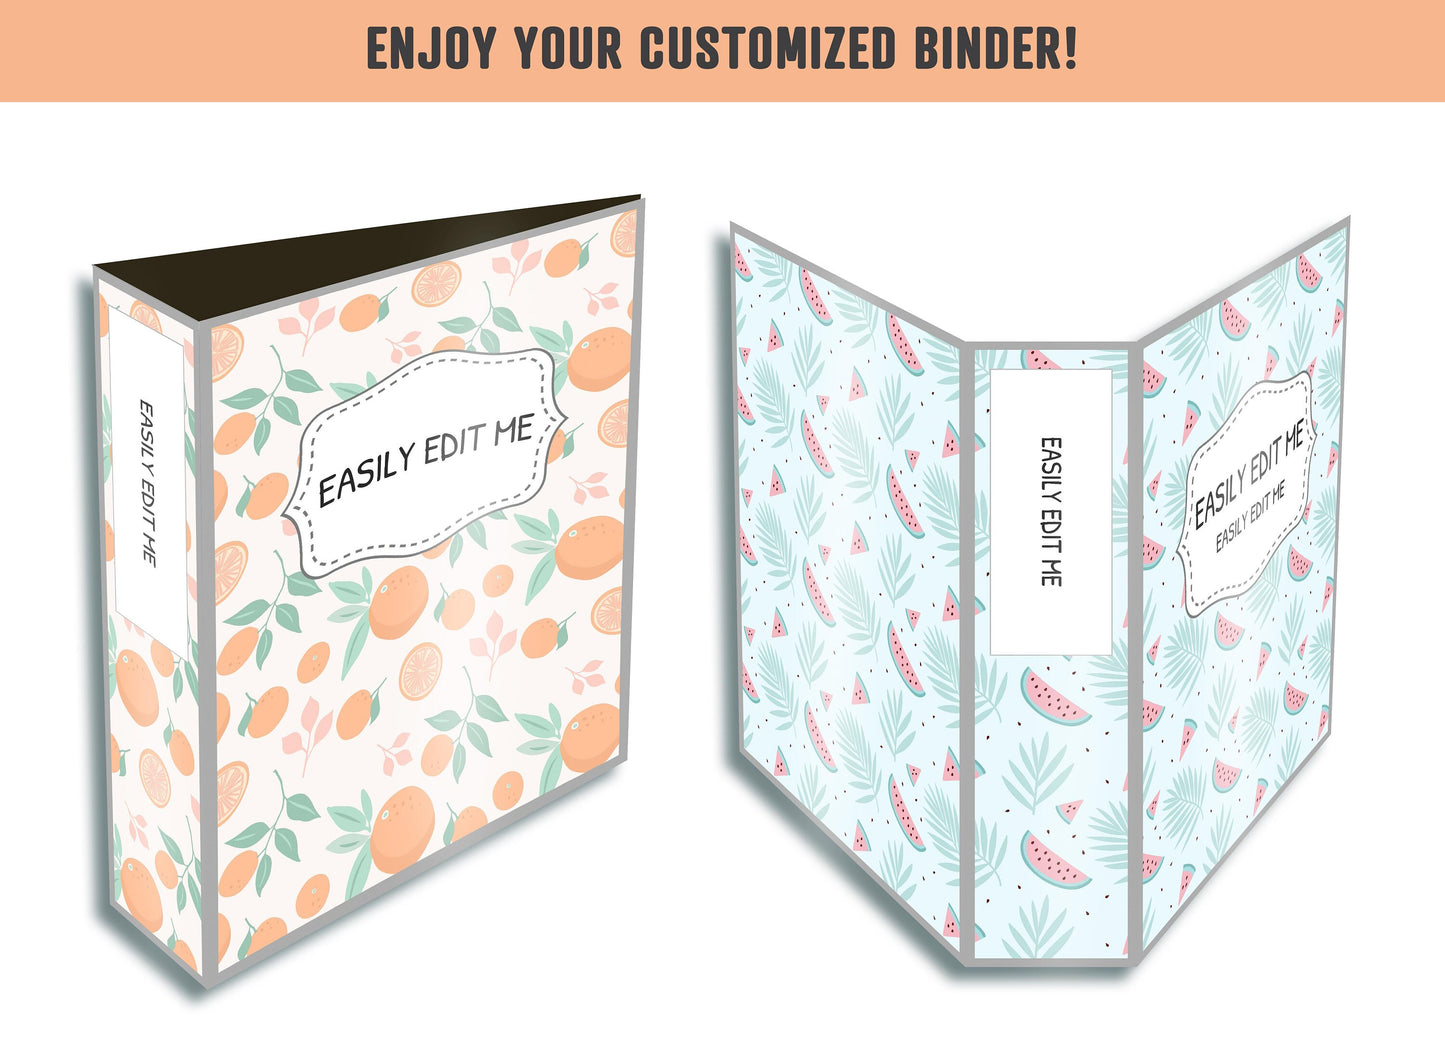 Tropical Fruits and Berries Binder Cover, 10 Printable & Editable Binder Covers+Spines, Binder Inserts,Teacher/School Planner Cover Template